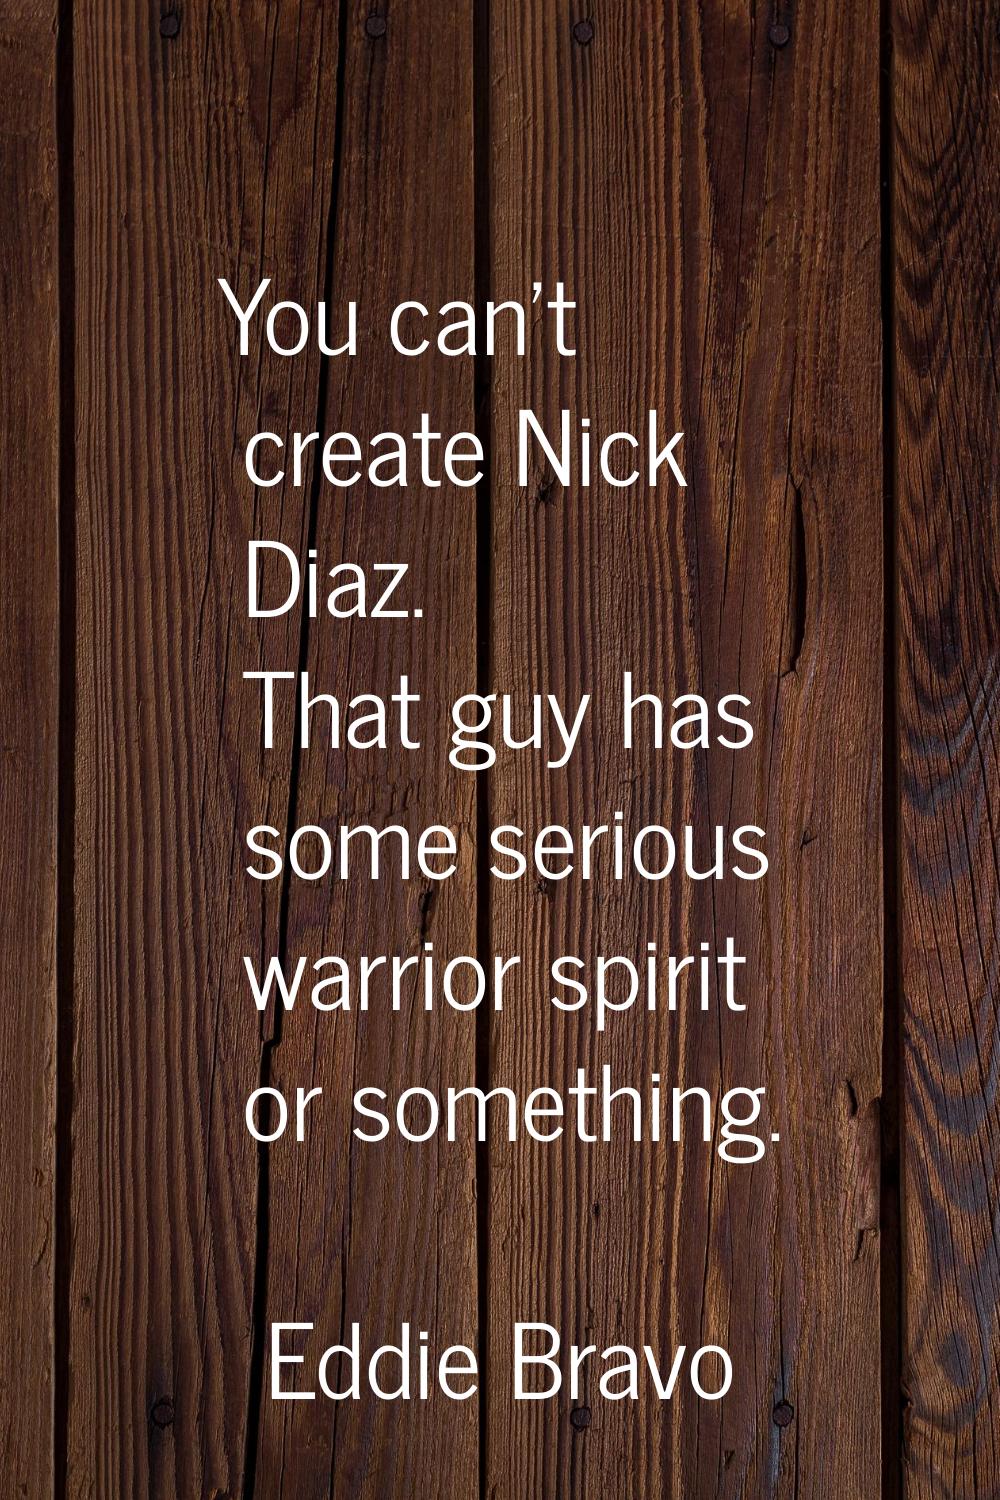 You can't create Nick Diaz. That guy has some serious warrior spirit or something.